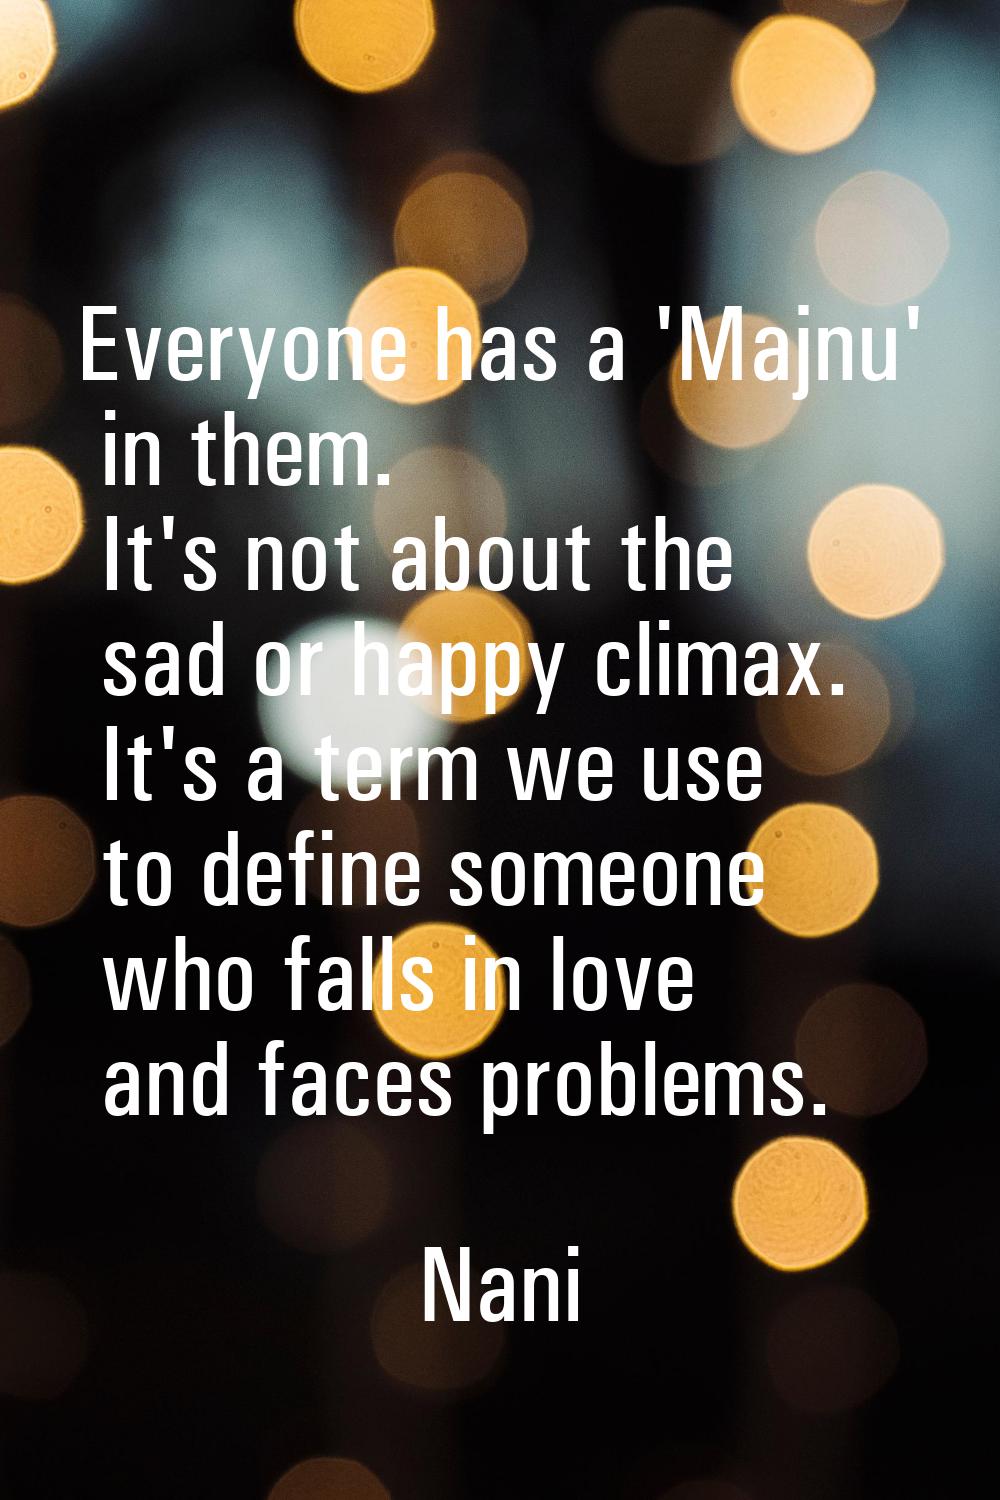 Everyone has a 'Majnu' in them. It's not about the sad or happy climax. It's a term we use to defin